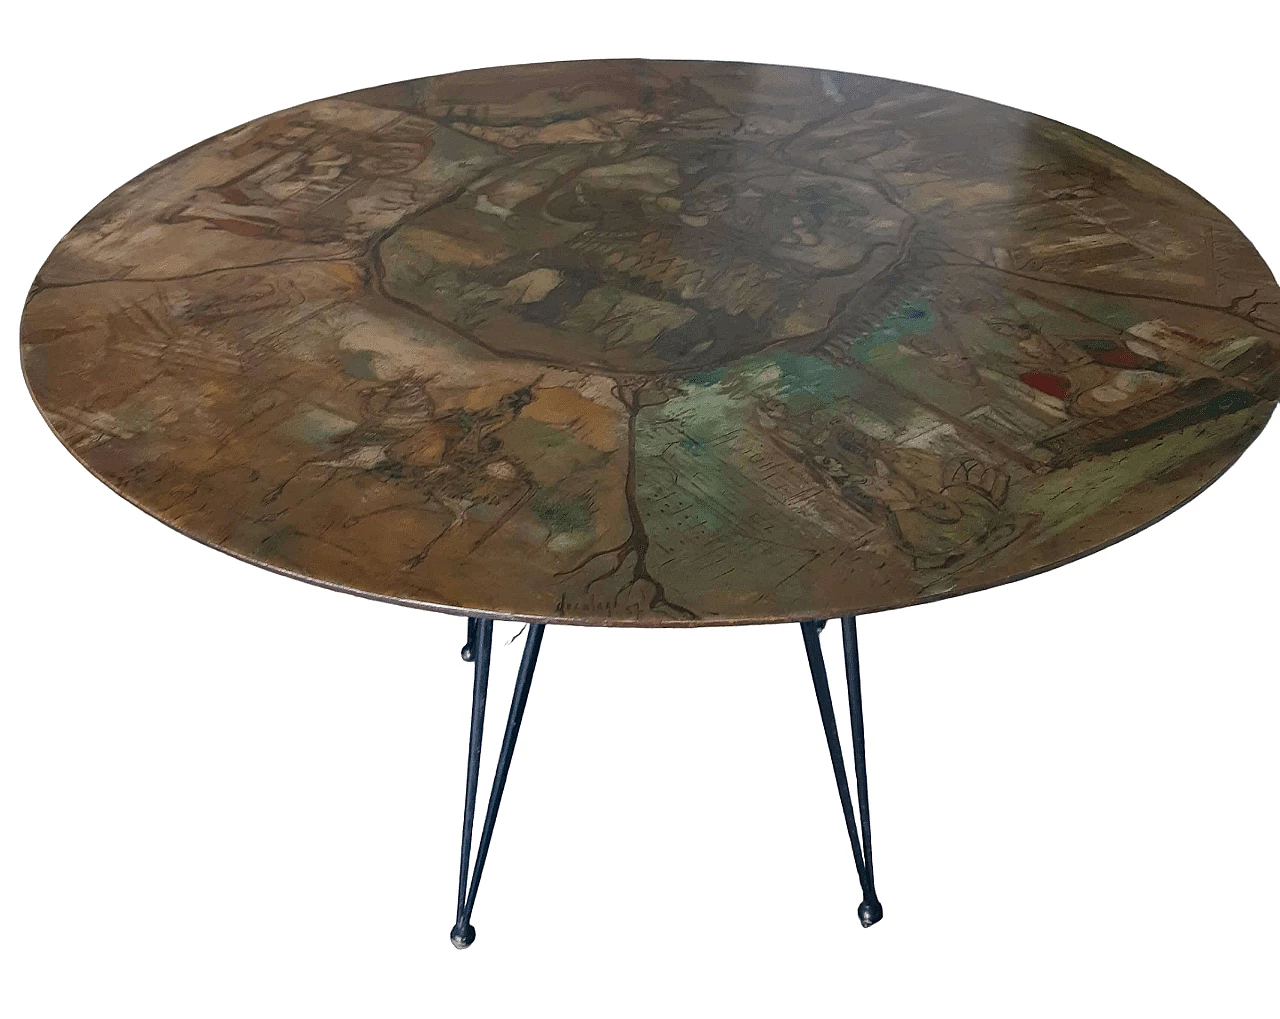 Table by Cumino decorated by Bottega d'Arte Decalage, 1957 18